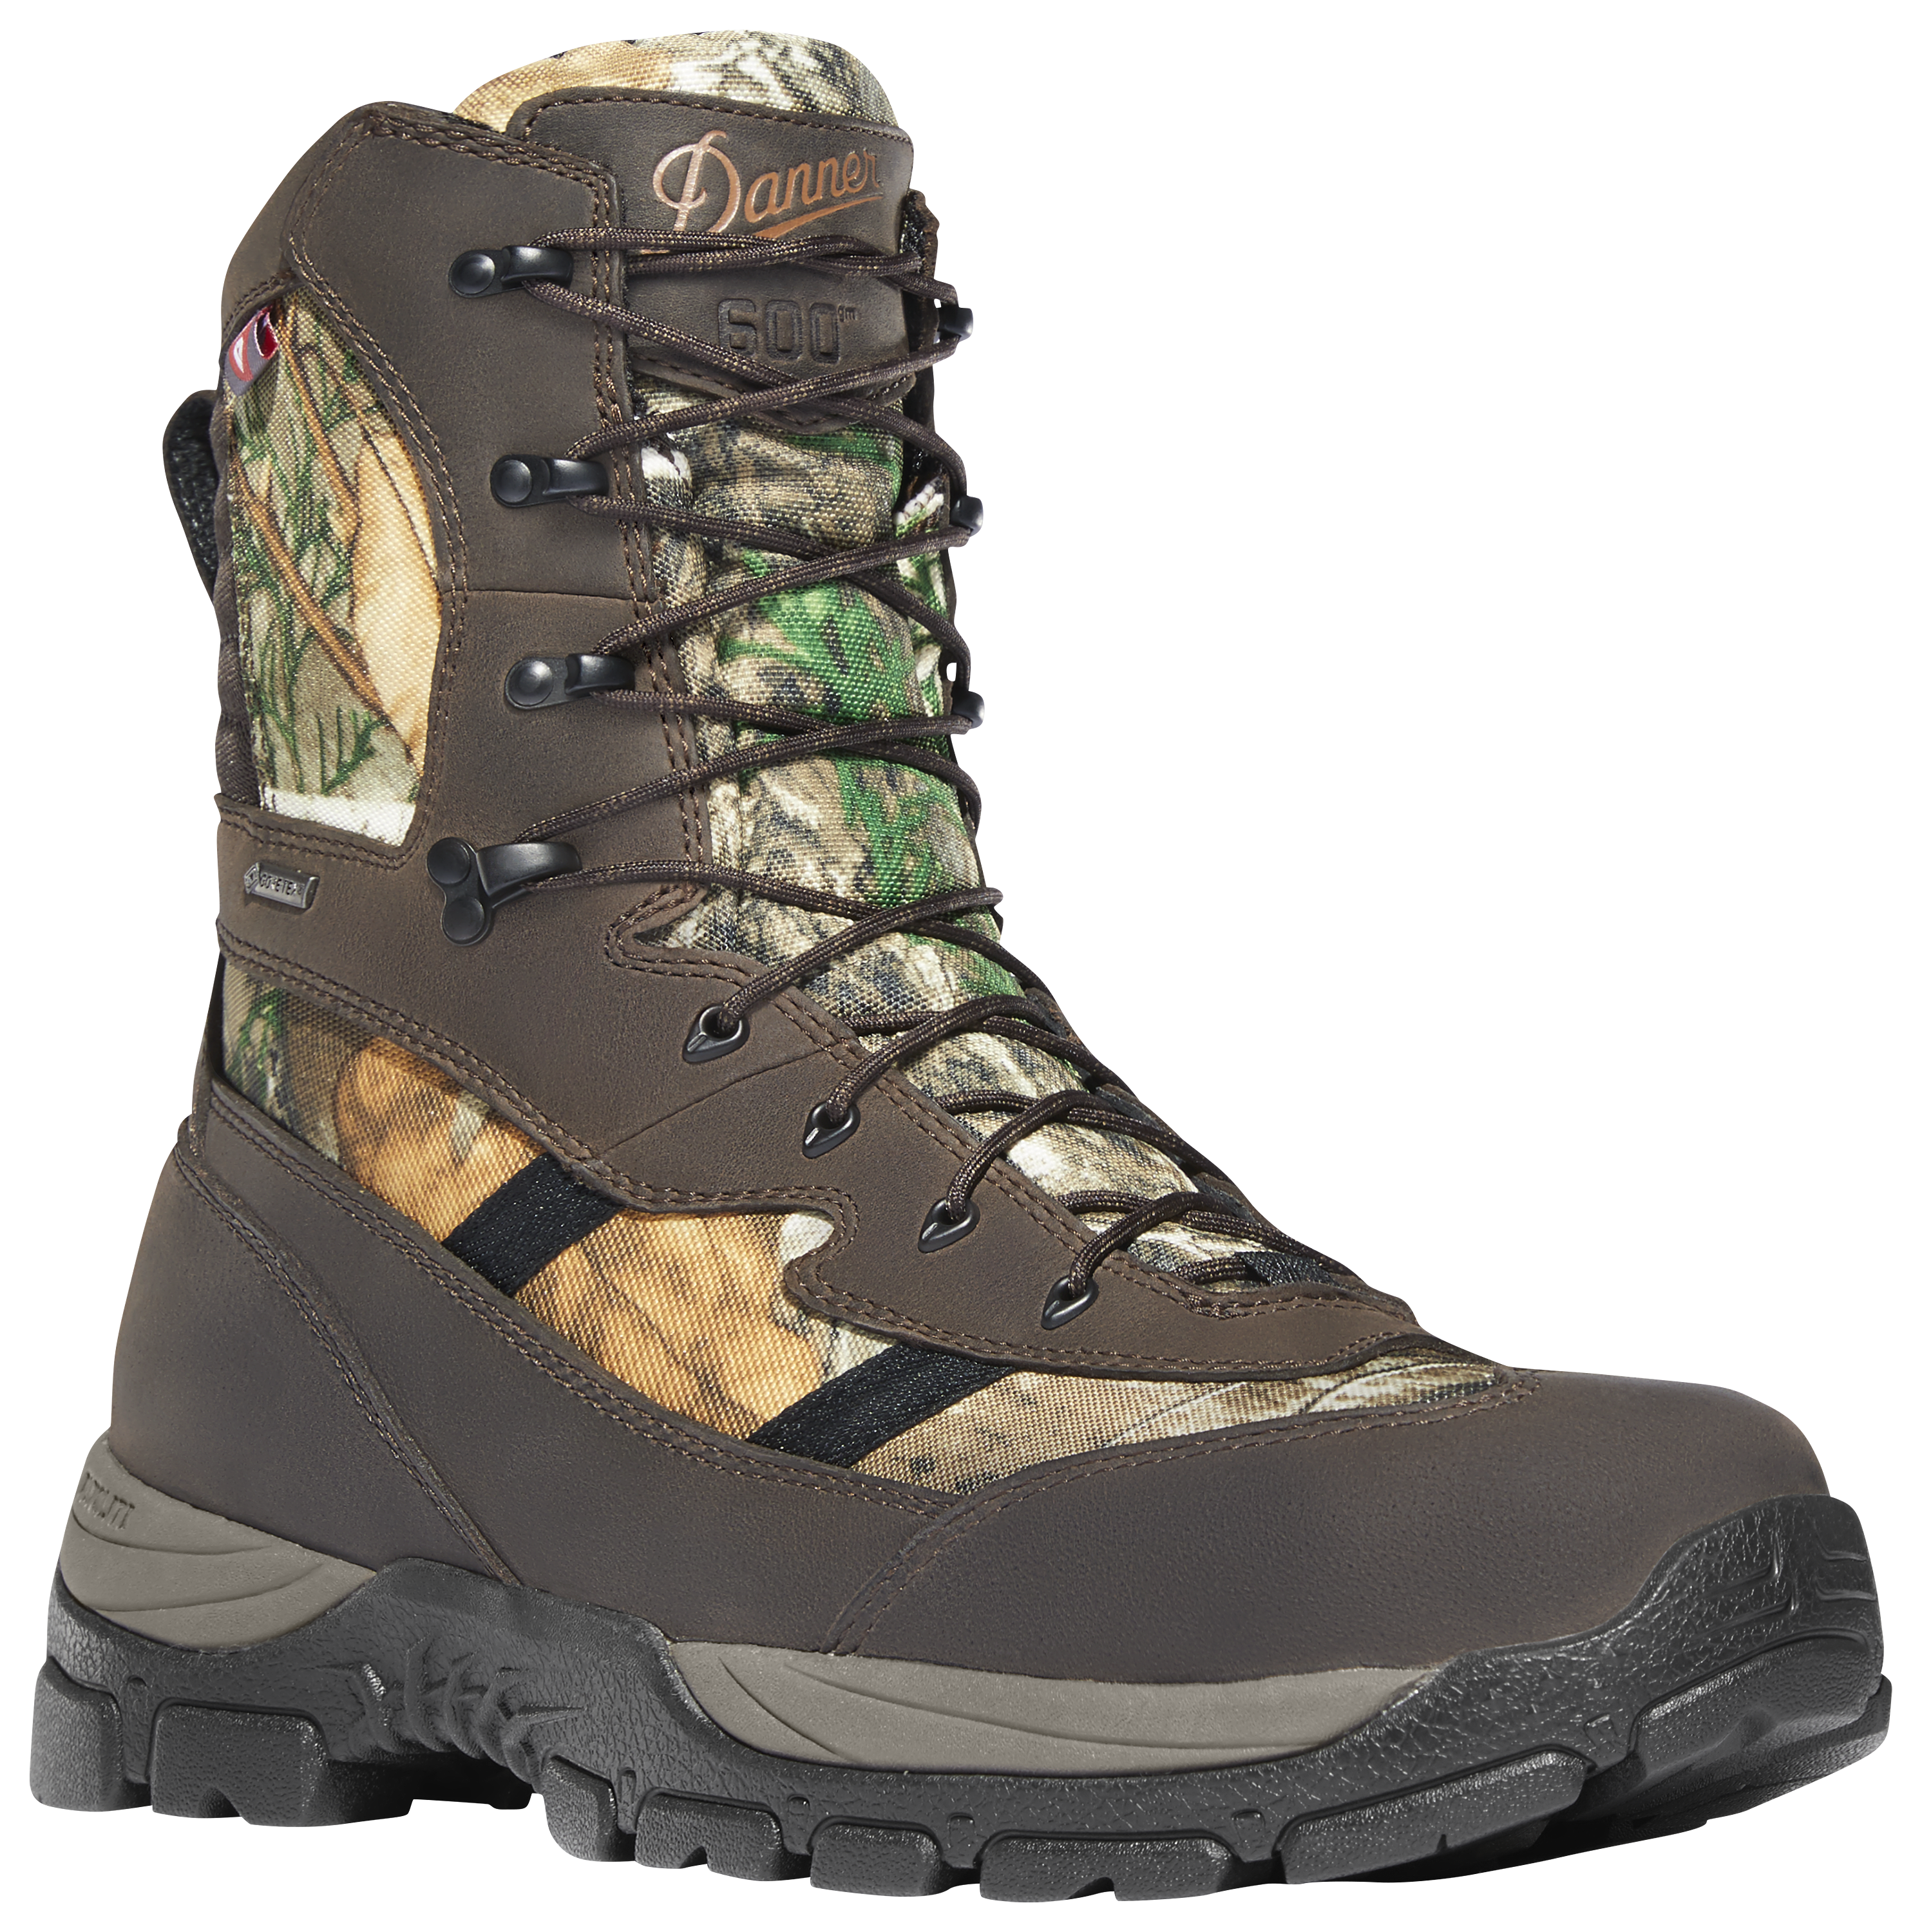 Danner Alsea GORE-TEX Insulated Hunting Boots for Men - Mossy Oak Break-Up Country - 8M